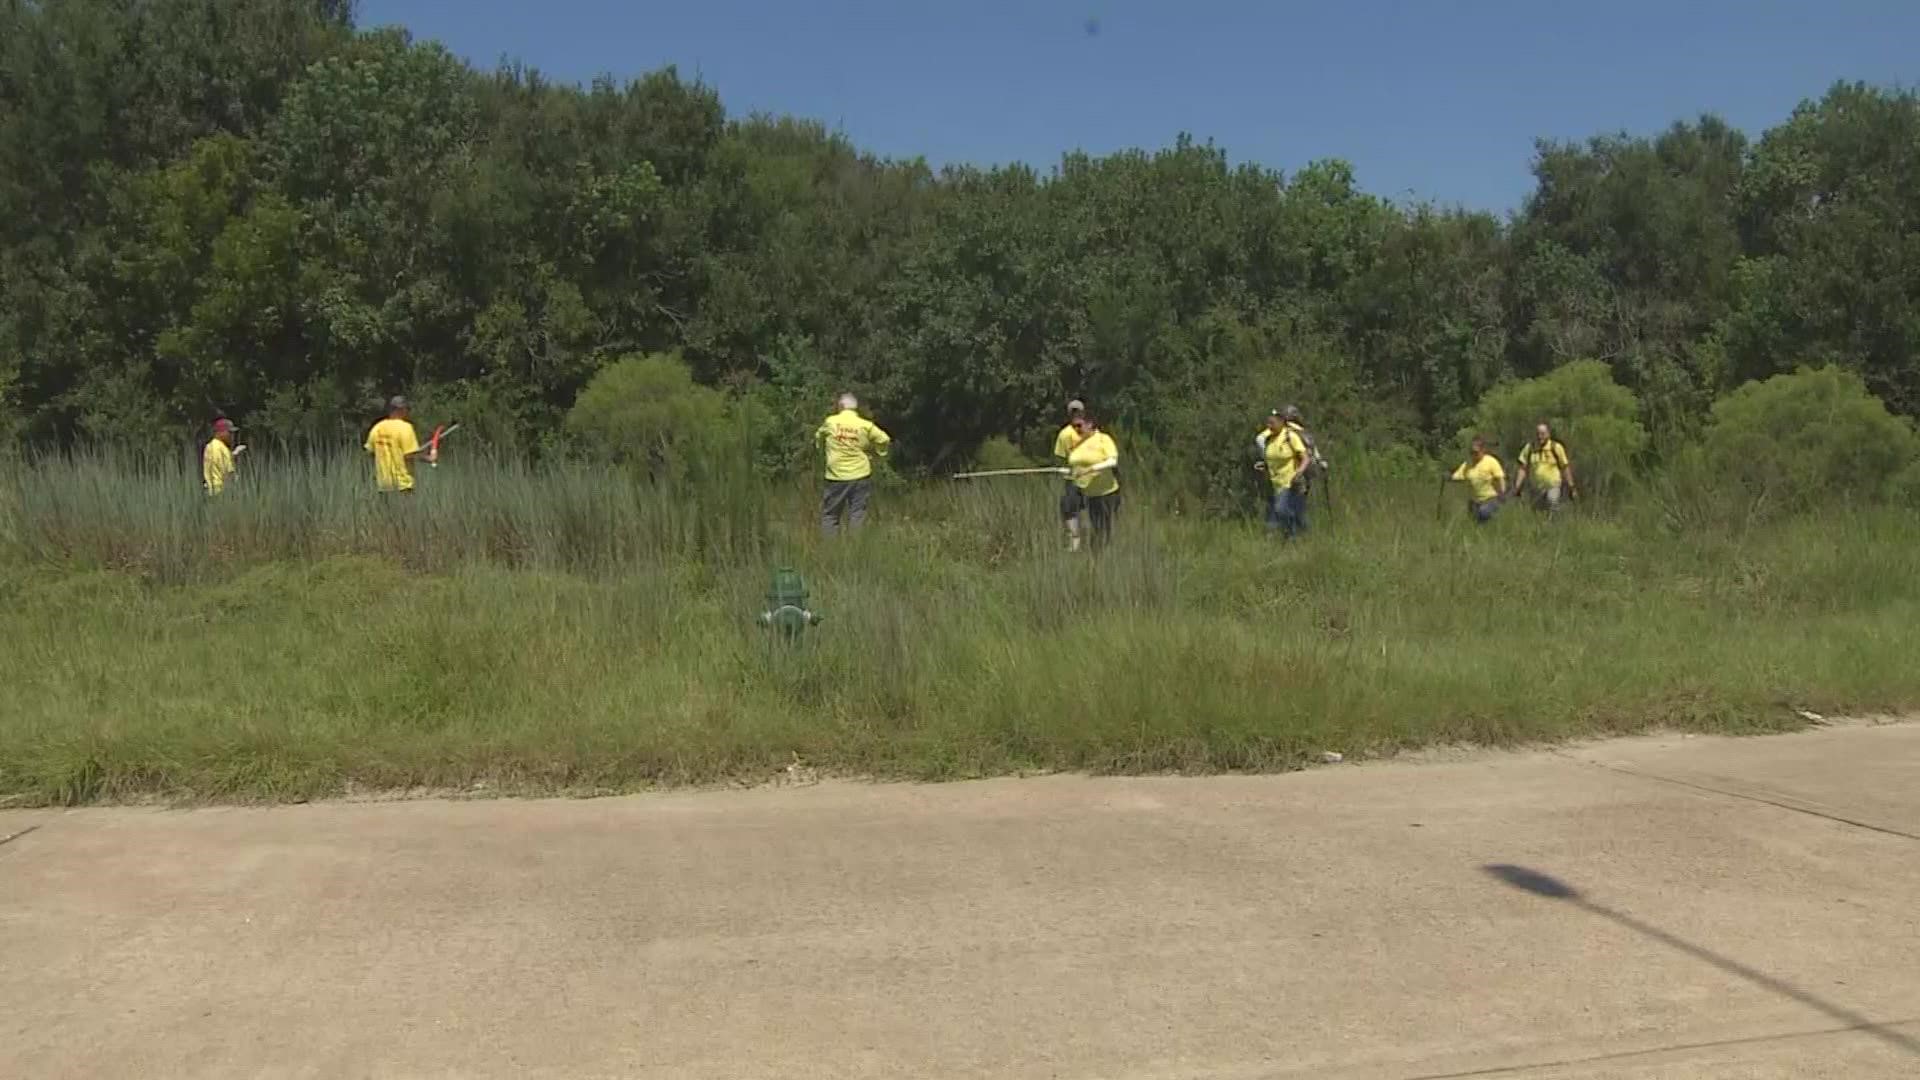 Texas EquuSearch volunteers are continuing the search for a woman who has been missing since Sept. 4.